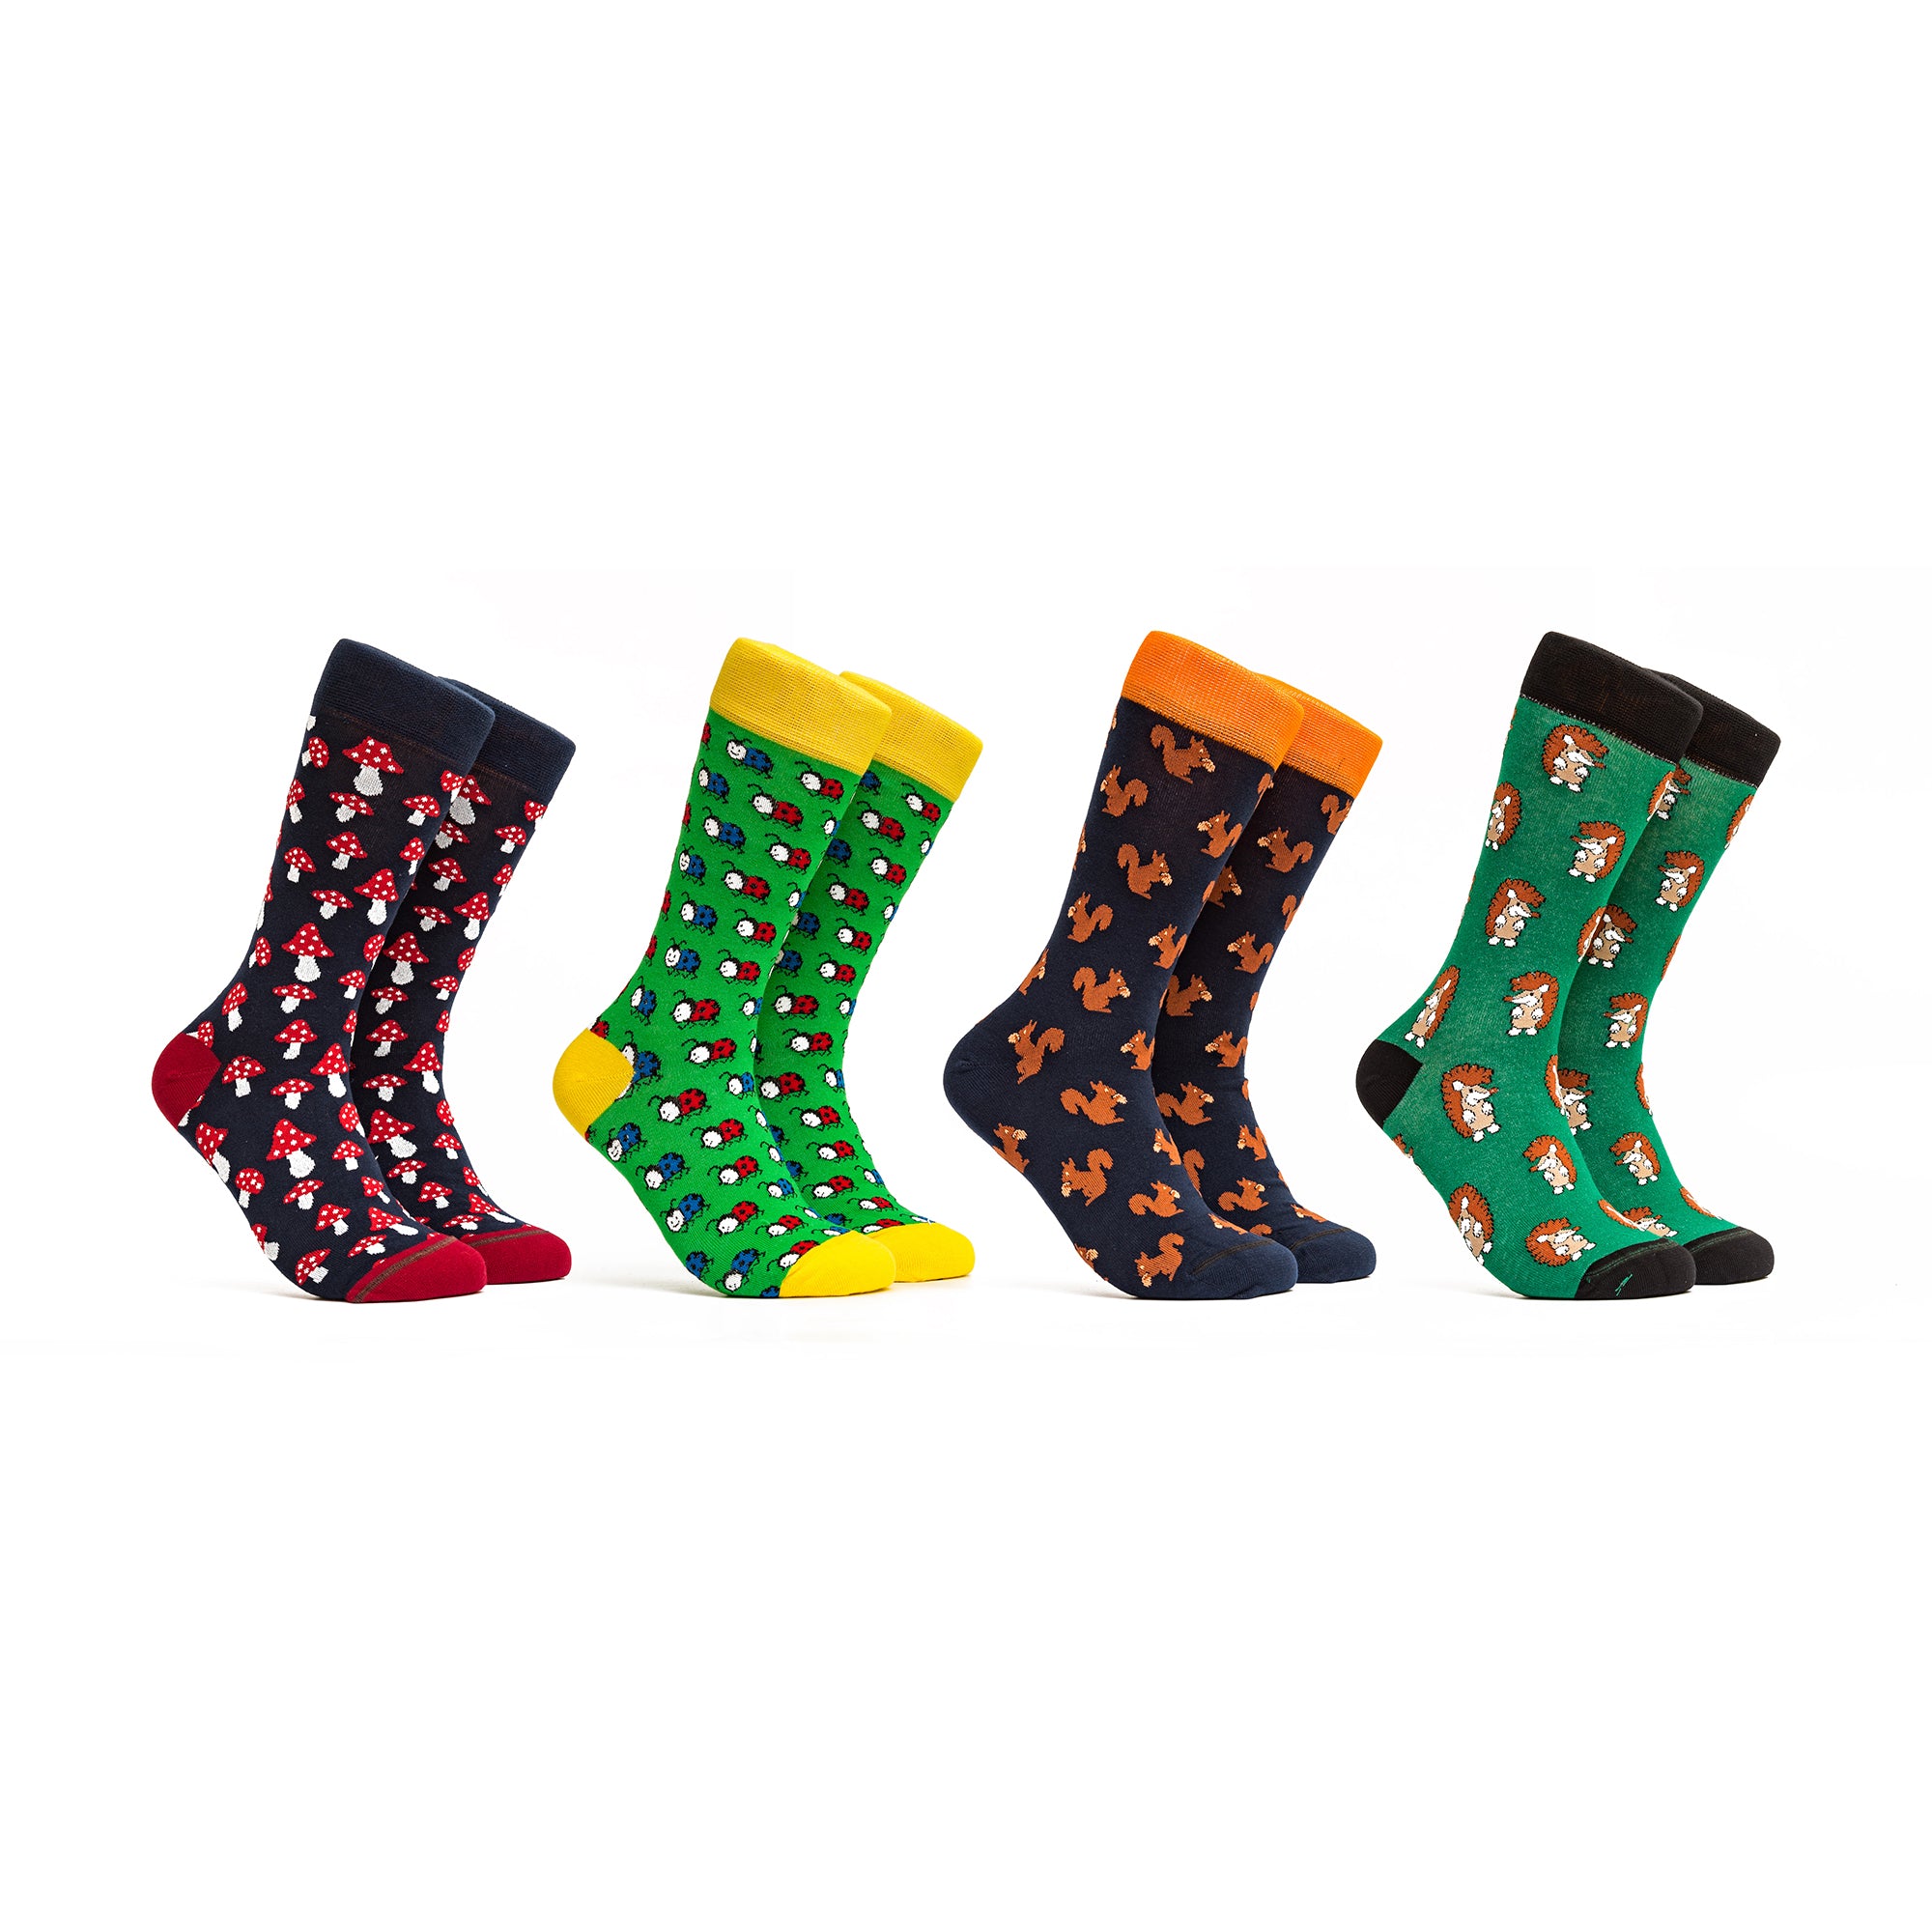 Forest Animals - Colors Black, Green and Orange - 4 pairs